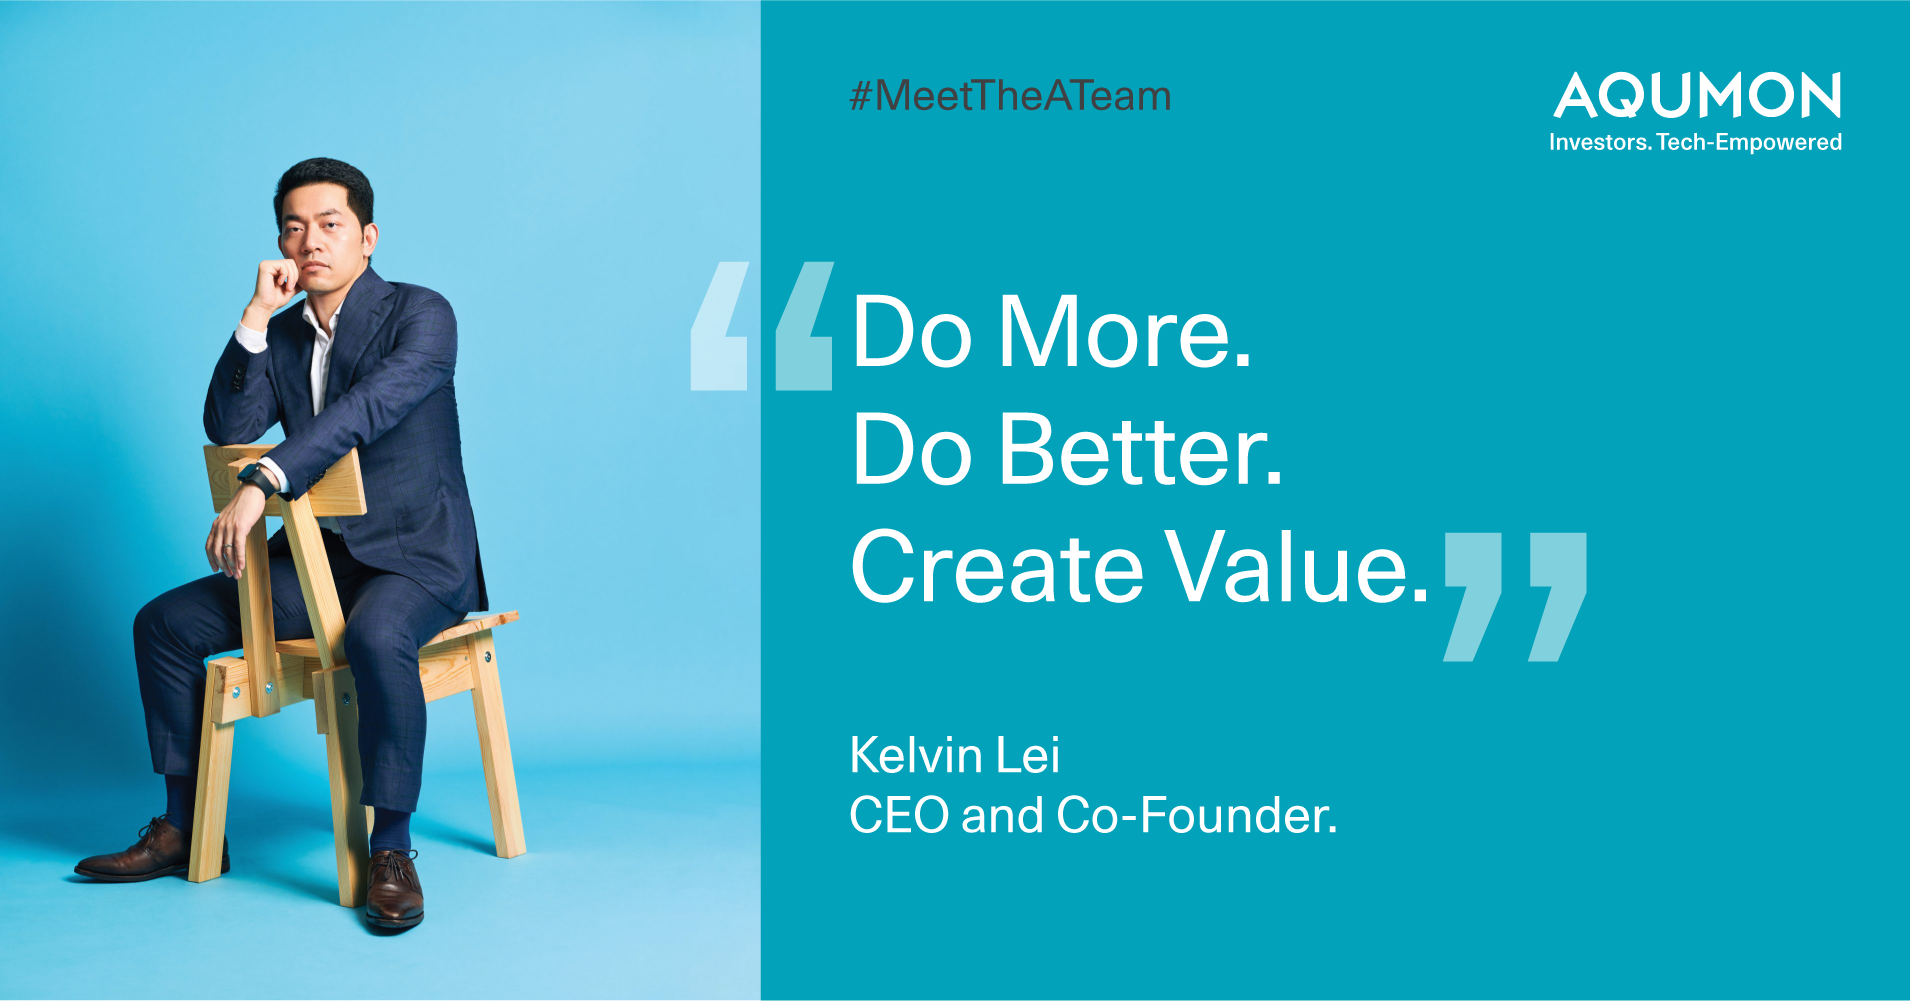 Up Close and Personal With The A-Team CEO: Kelvin Lei